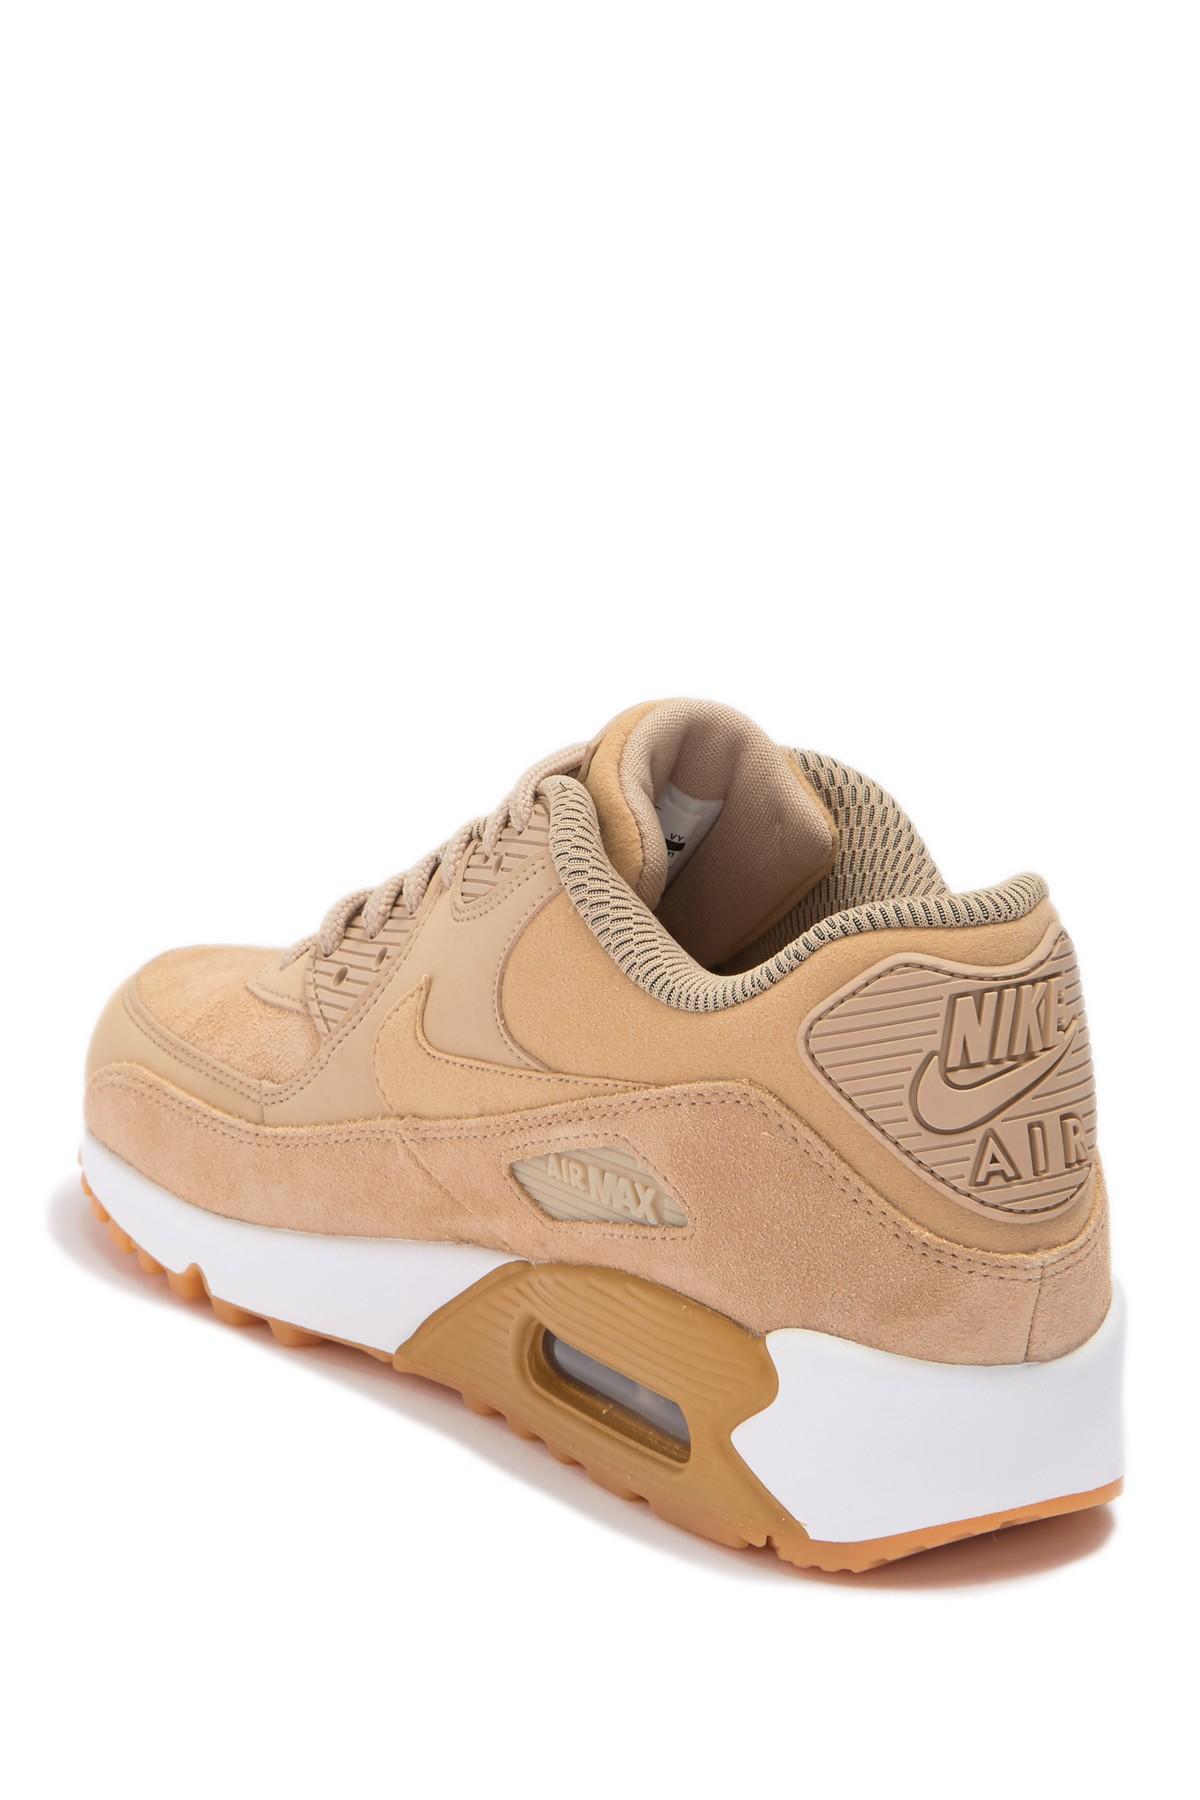 Nike Synthetic Air Max 90 Se Sneaker in Brown | Lyst